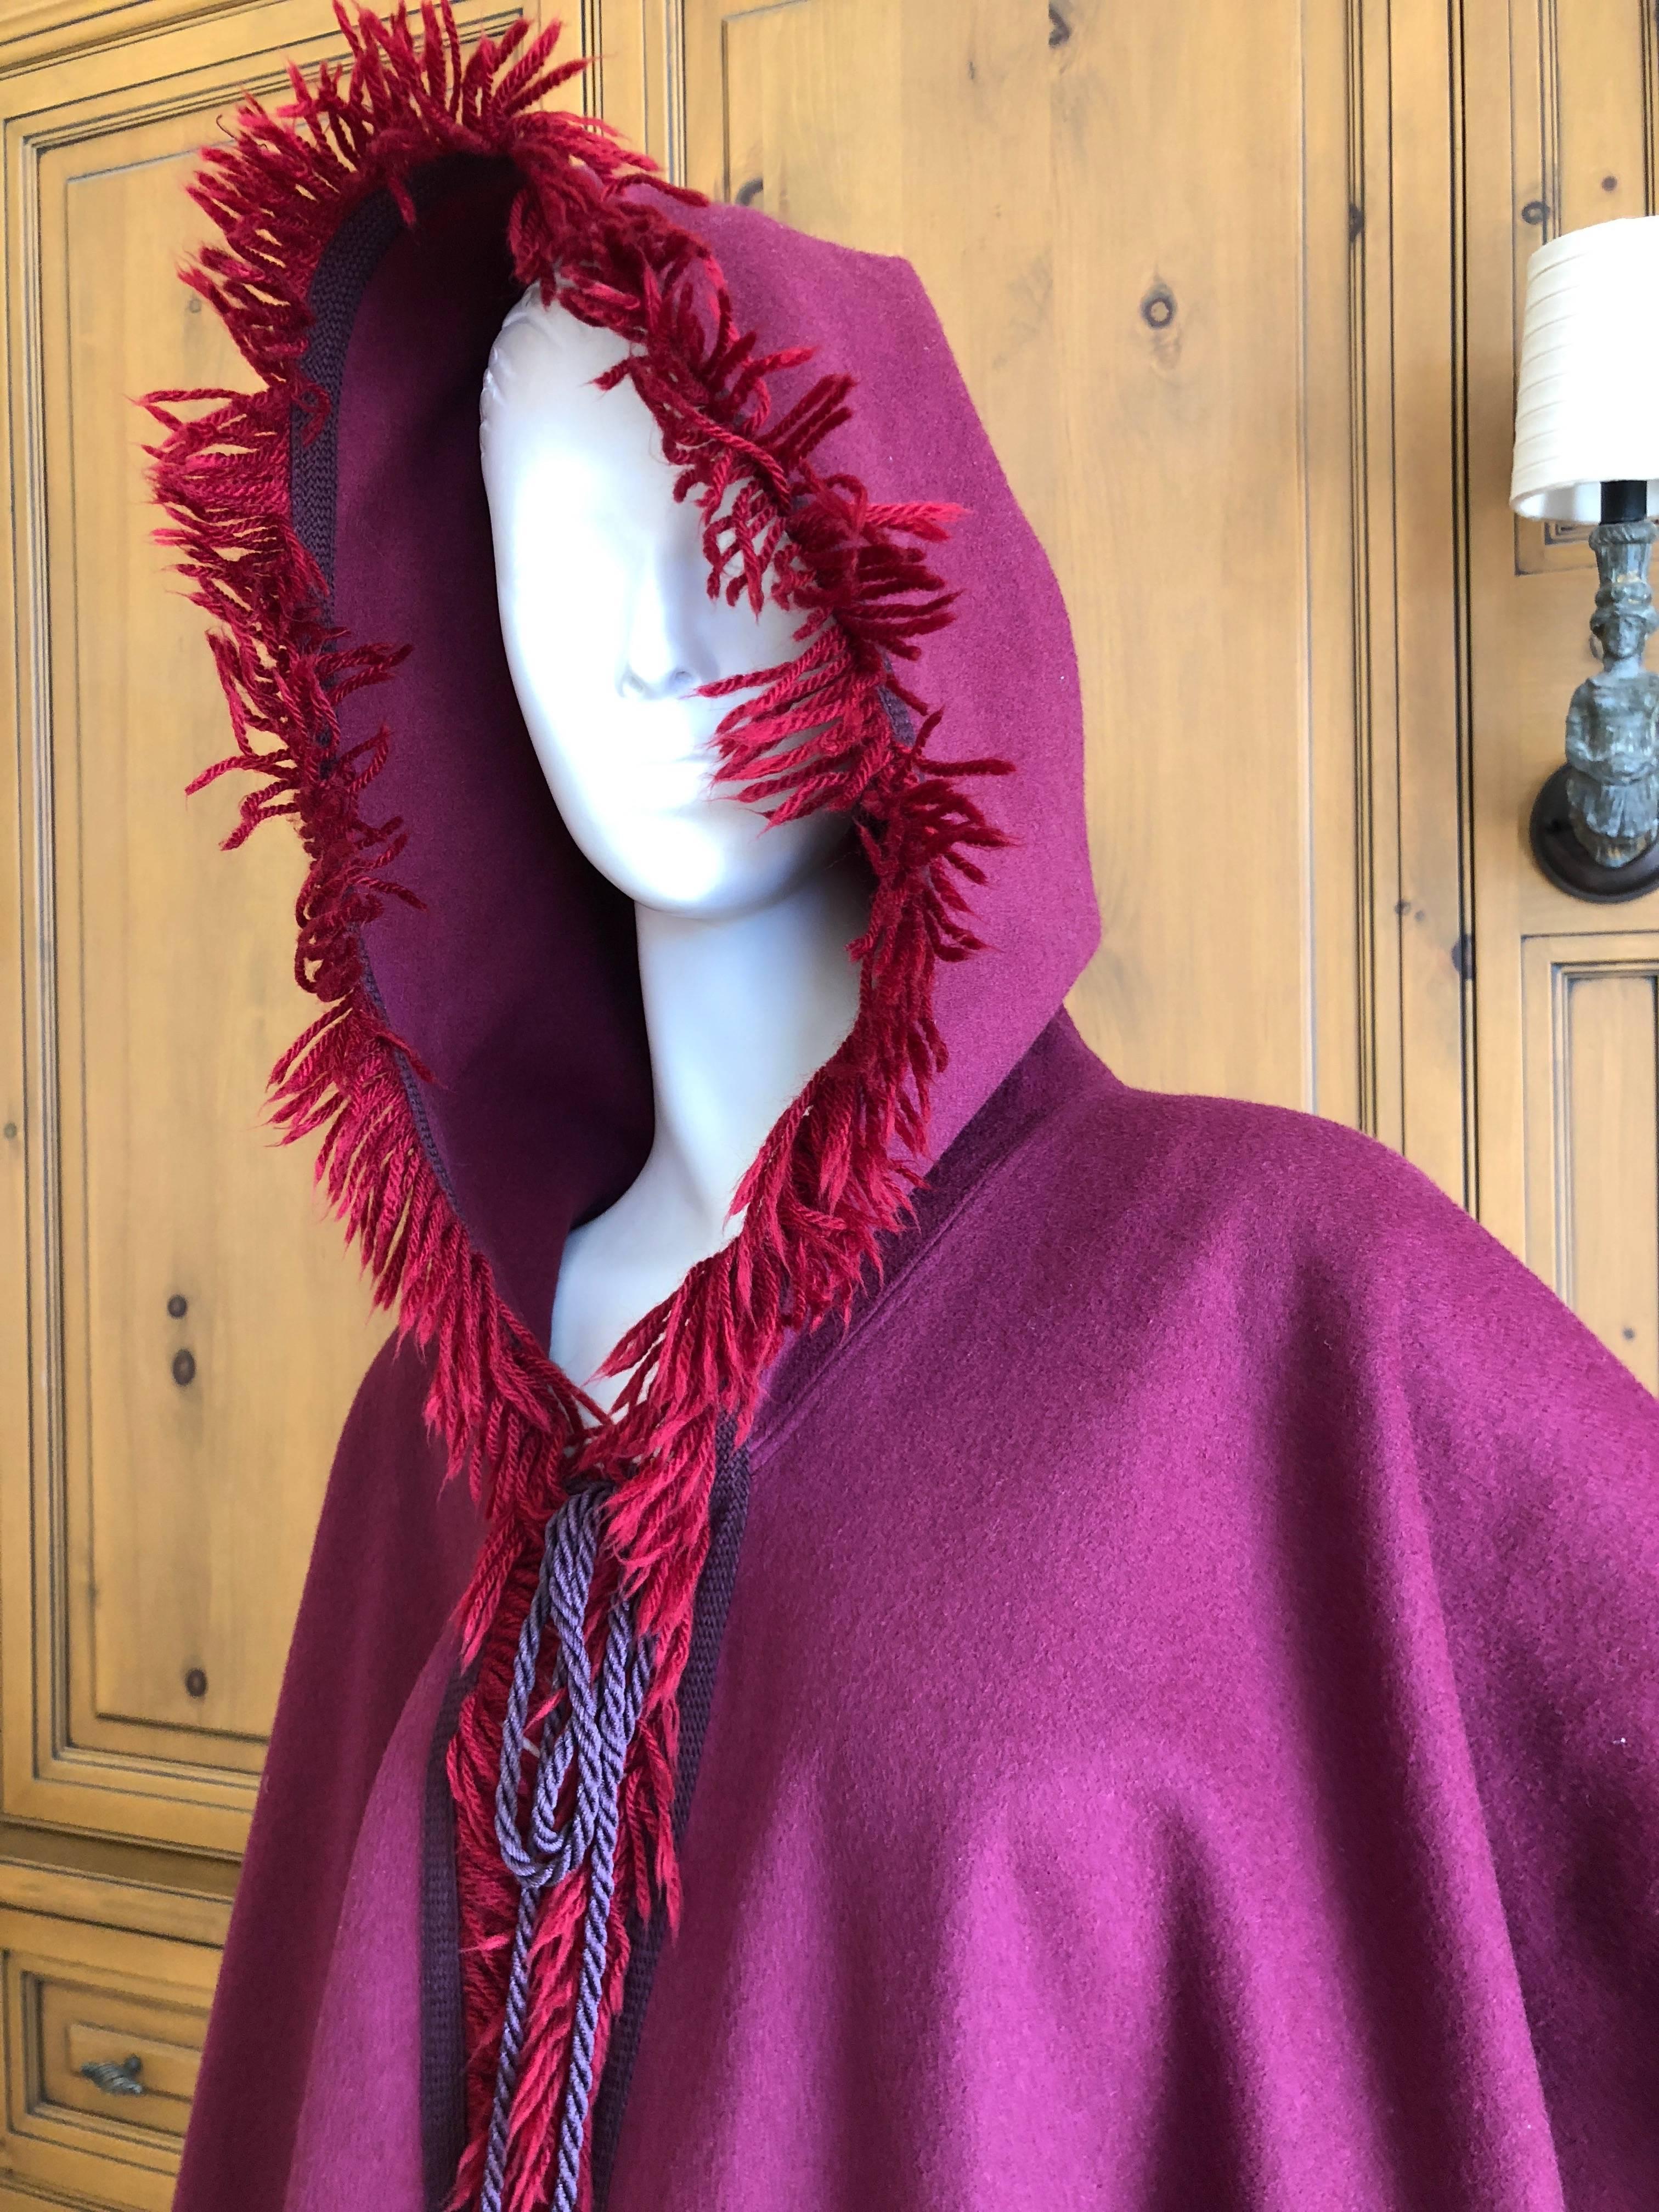 Yves Saint Laurent Rive Gauche Purple Cape with Hood and Tassels.
Of all the Capes YSL designed, this one is the best. WIth sutache and double tassels on the front, hooded with a long tassel down the back.
Rare to find in this color.
In excellent